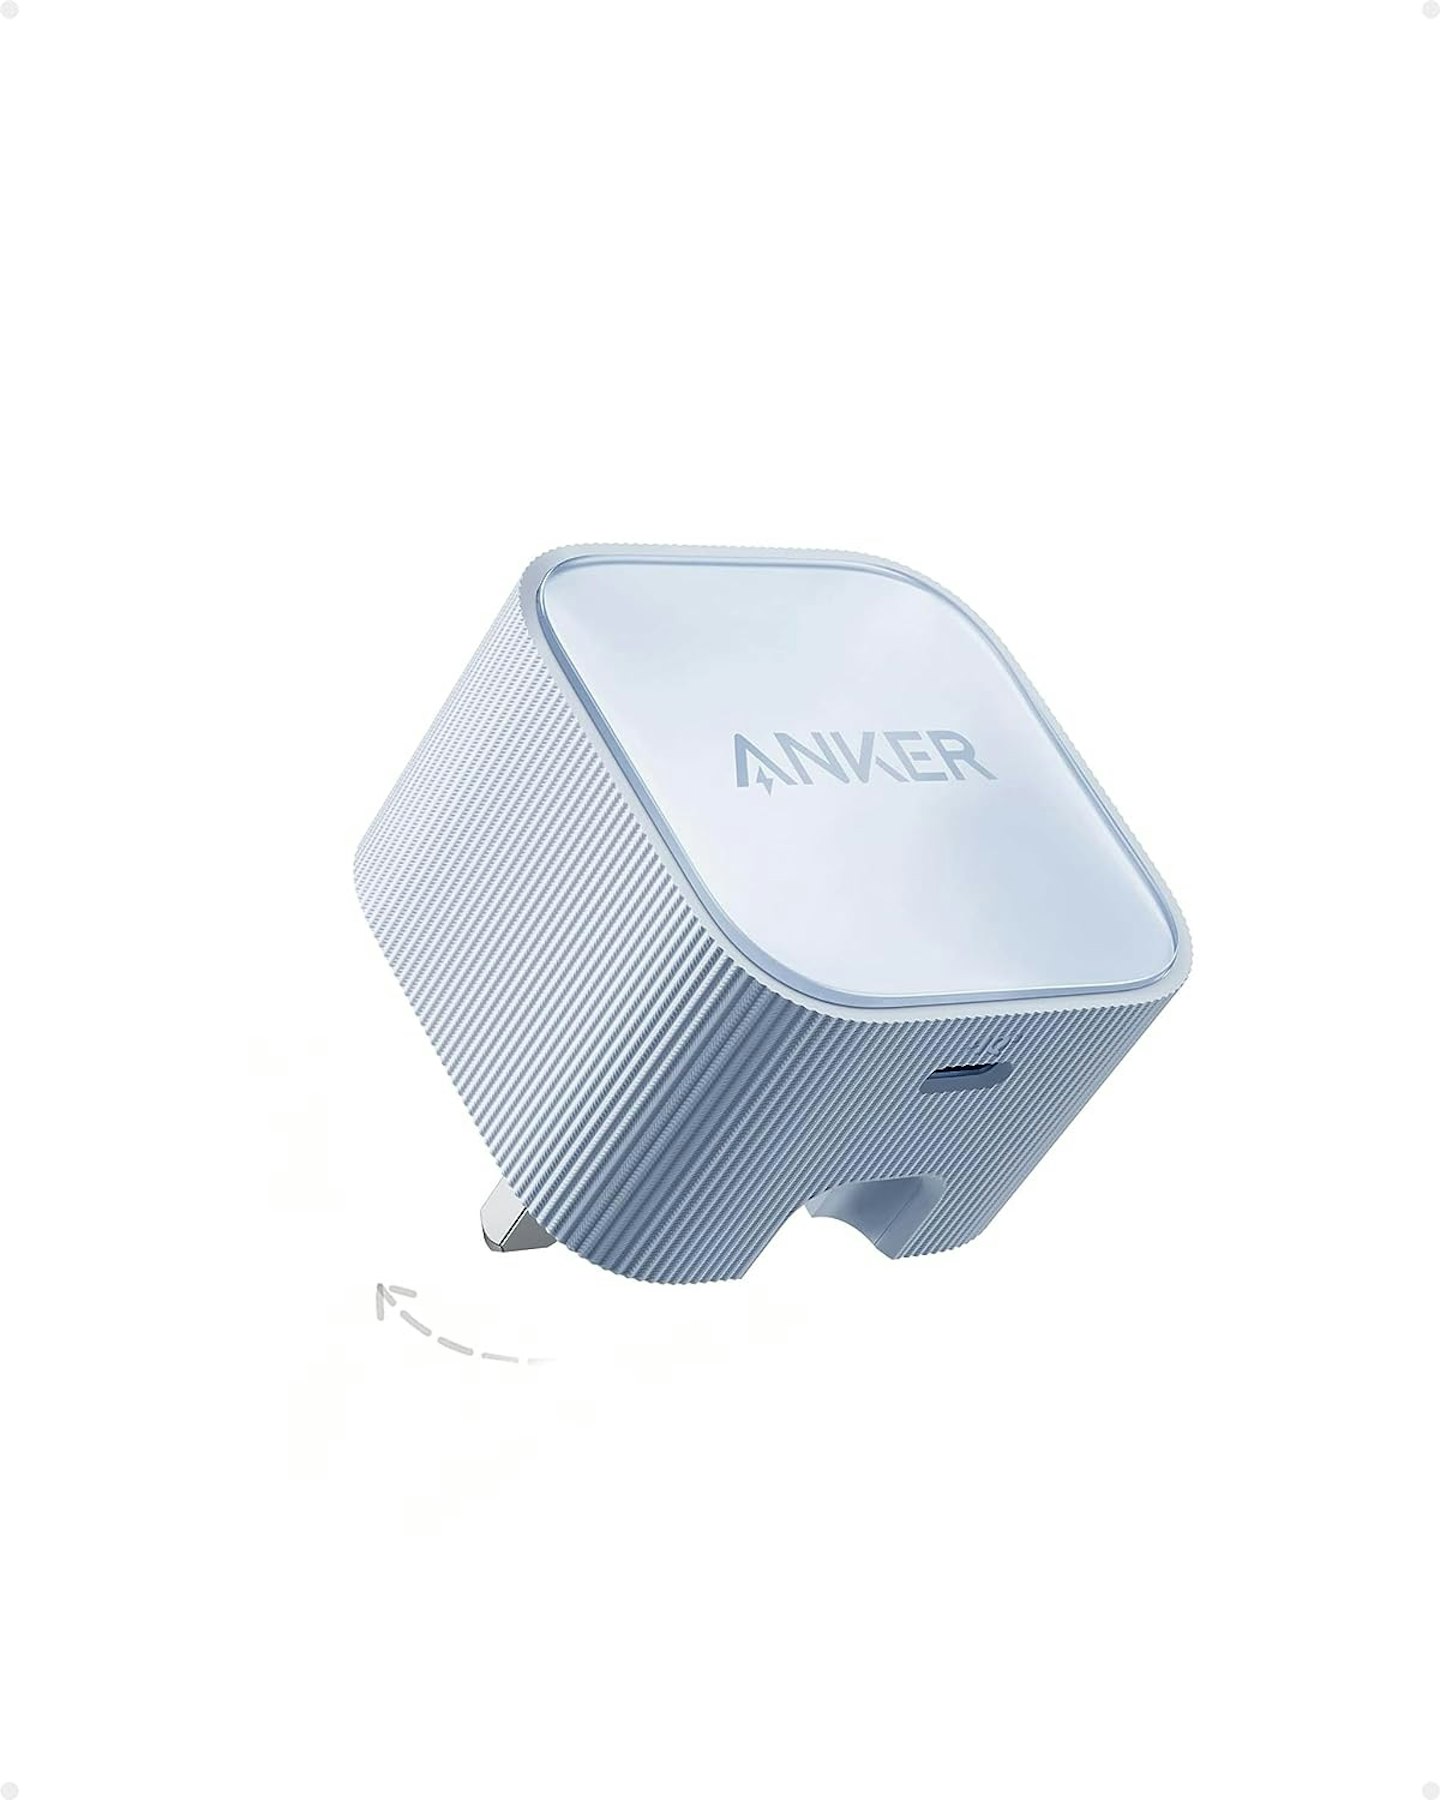 Anker 30w charger